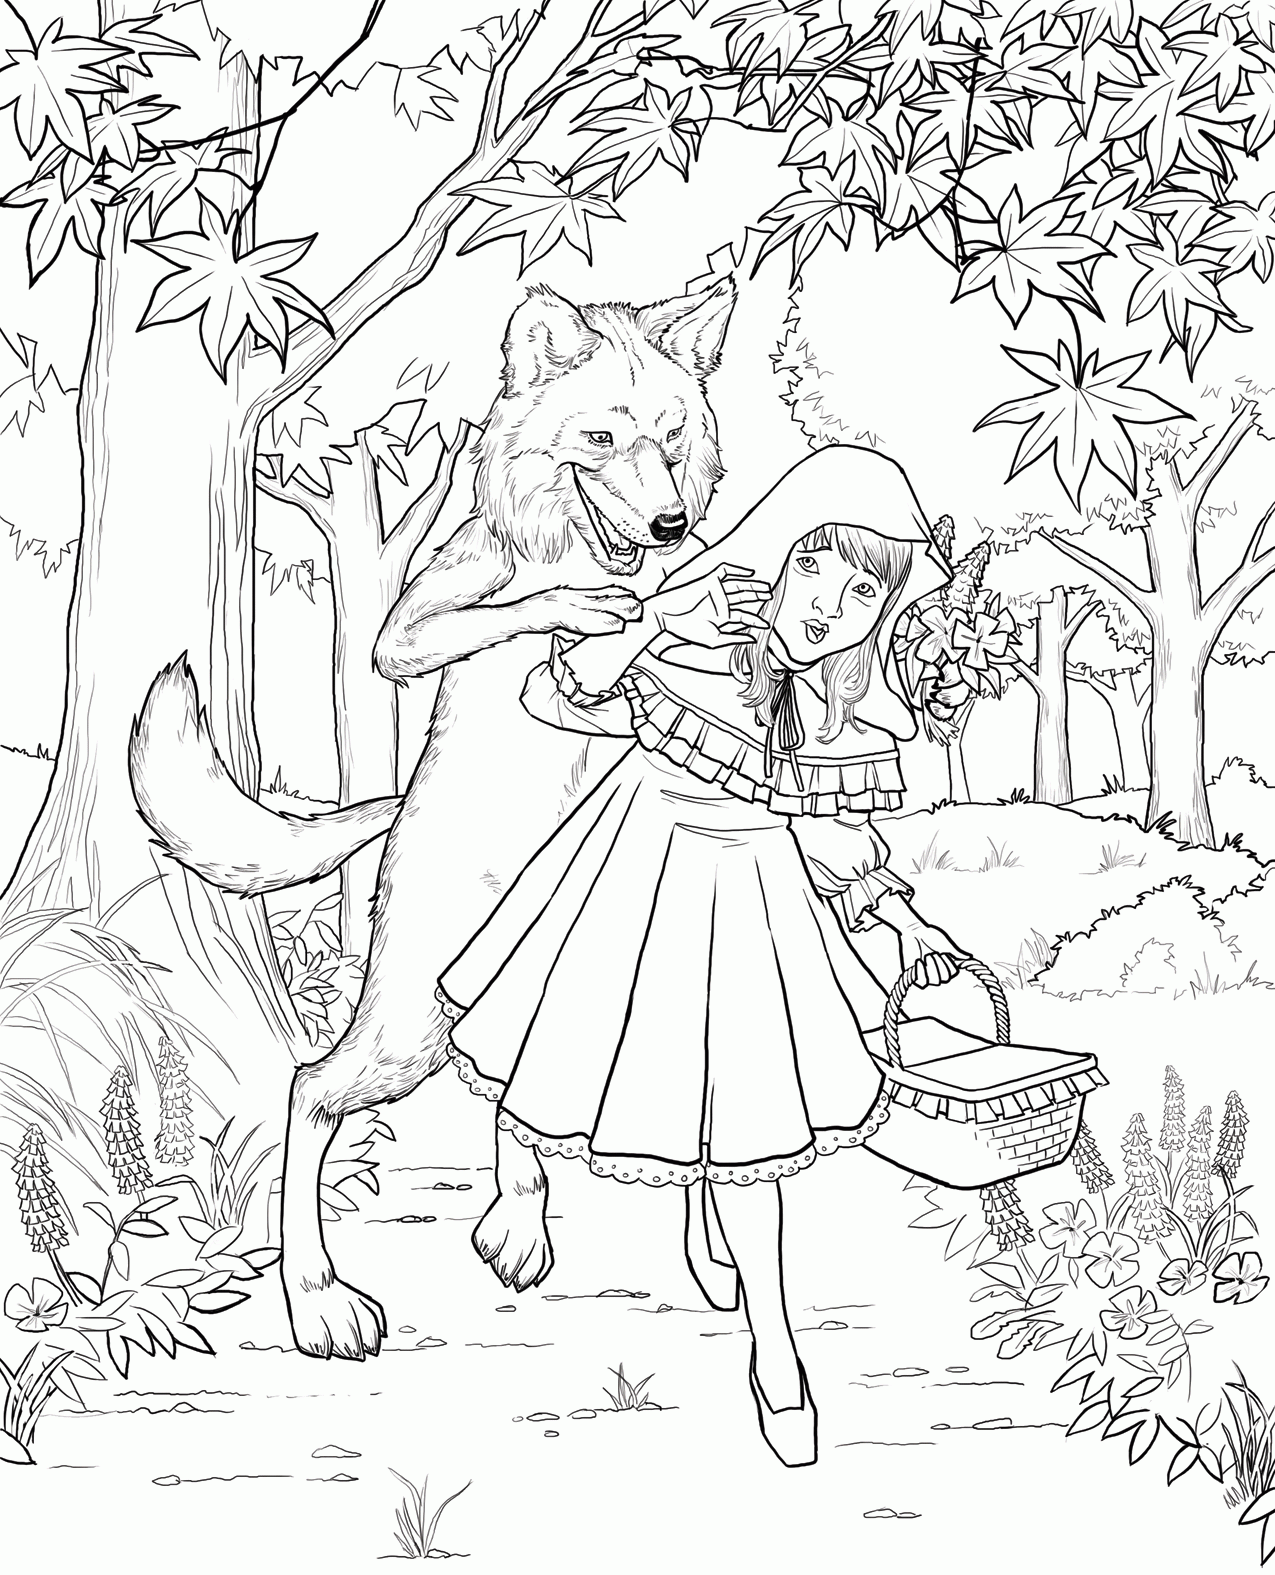 Little Red Riding Hood Coloring Pages Free - Coloring Home